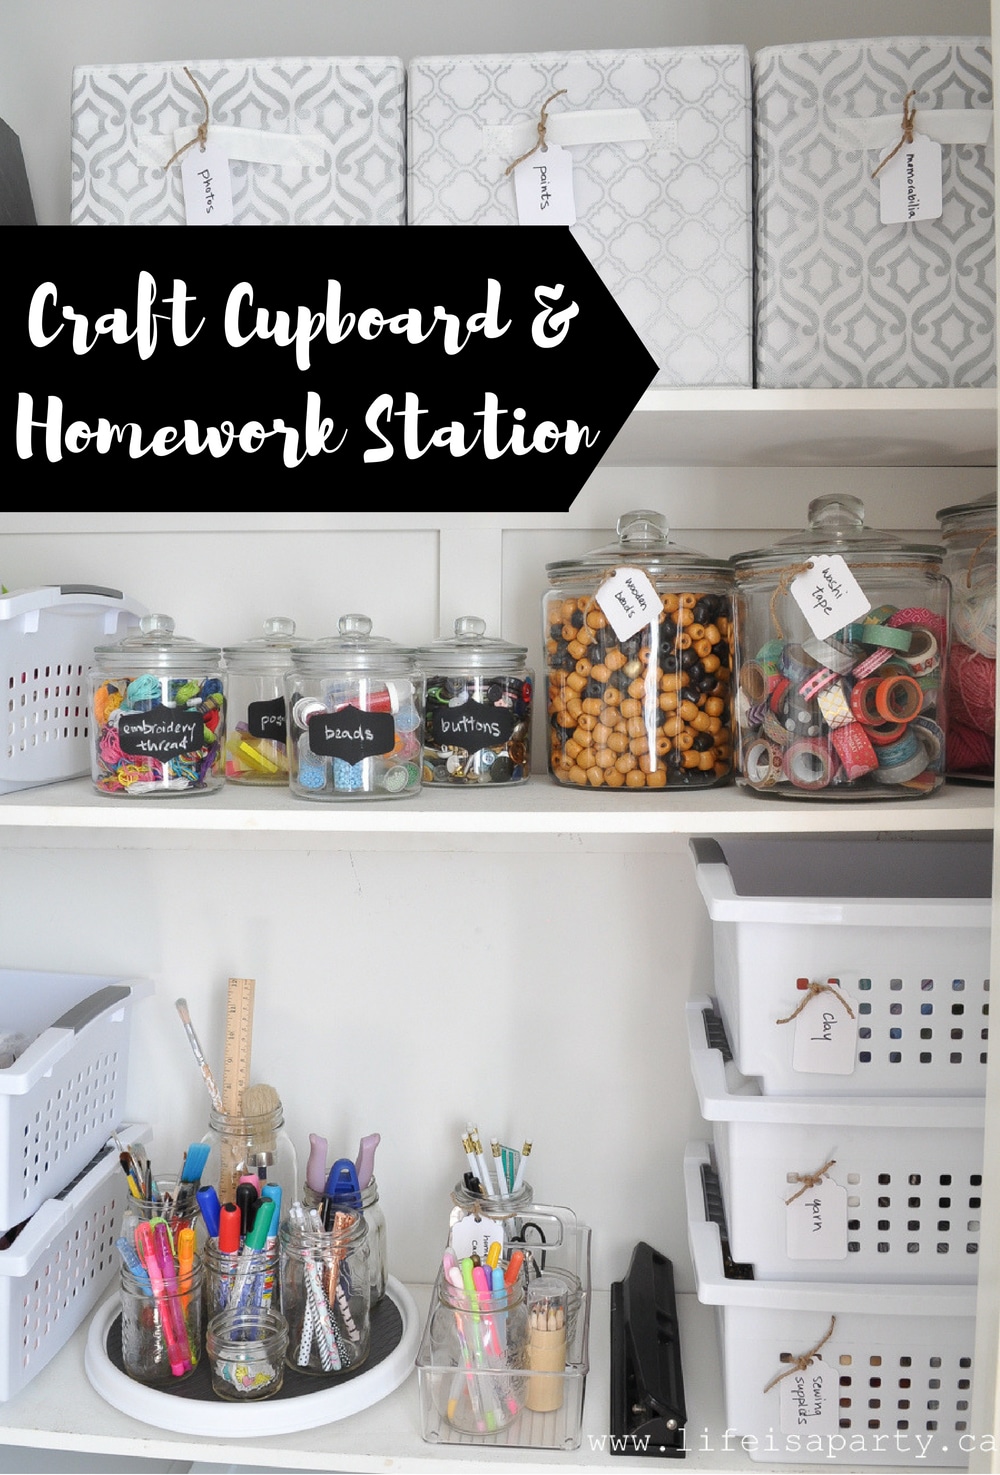 Craft Cupboard and Homework Station Ideas: see an old closet turned into an organized craft cupboard and homework station.